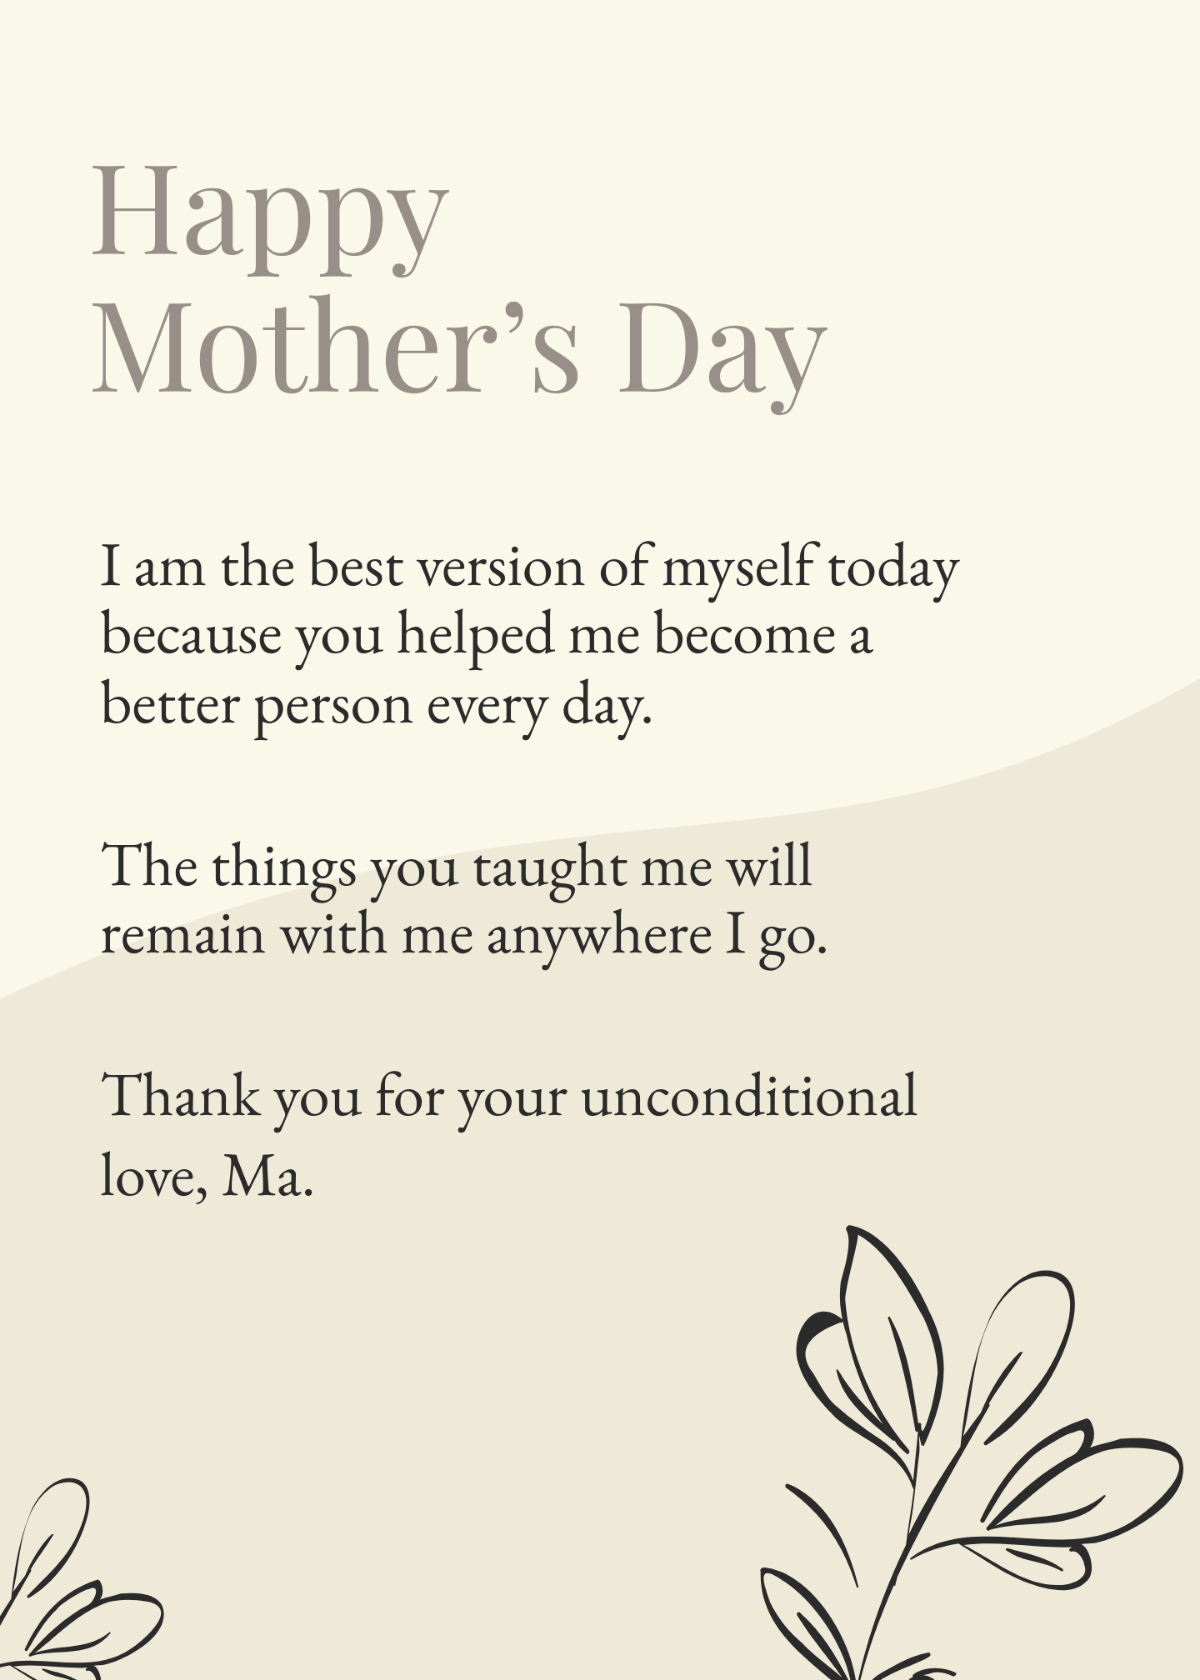 Mother's Day Special Message Template